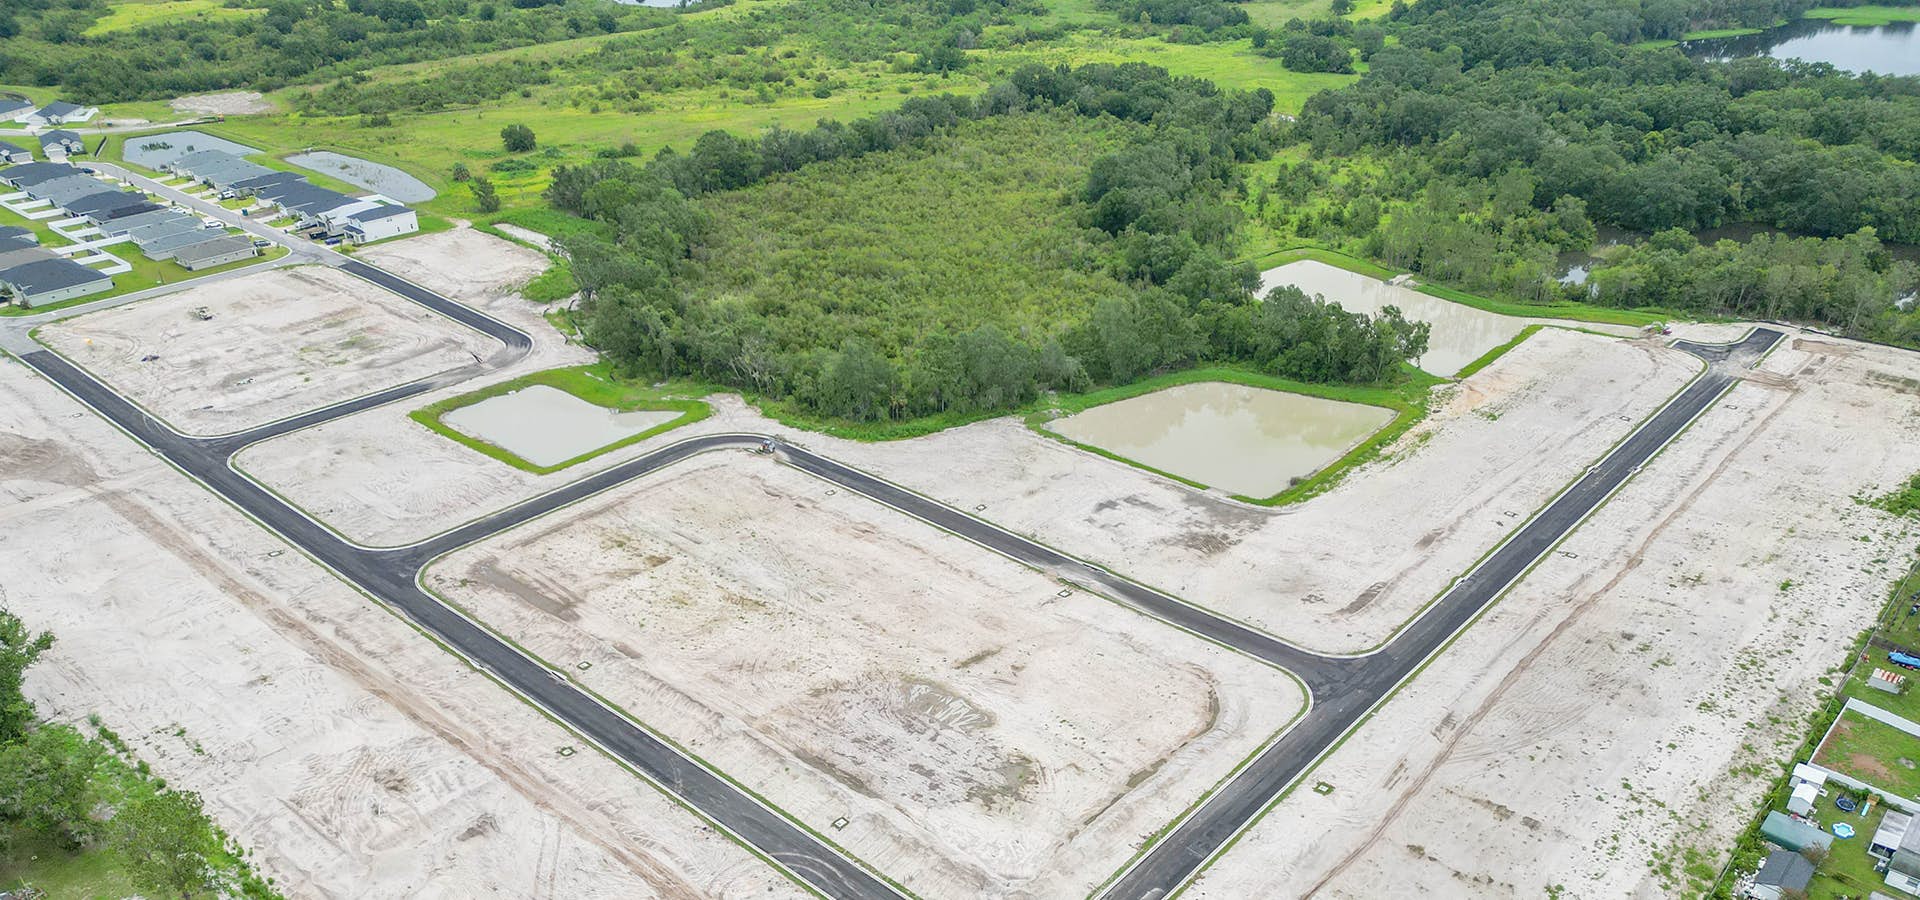 Aerial view of Phase 3 of Bridgeport Lakes in Mulberry, FL